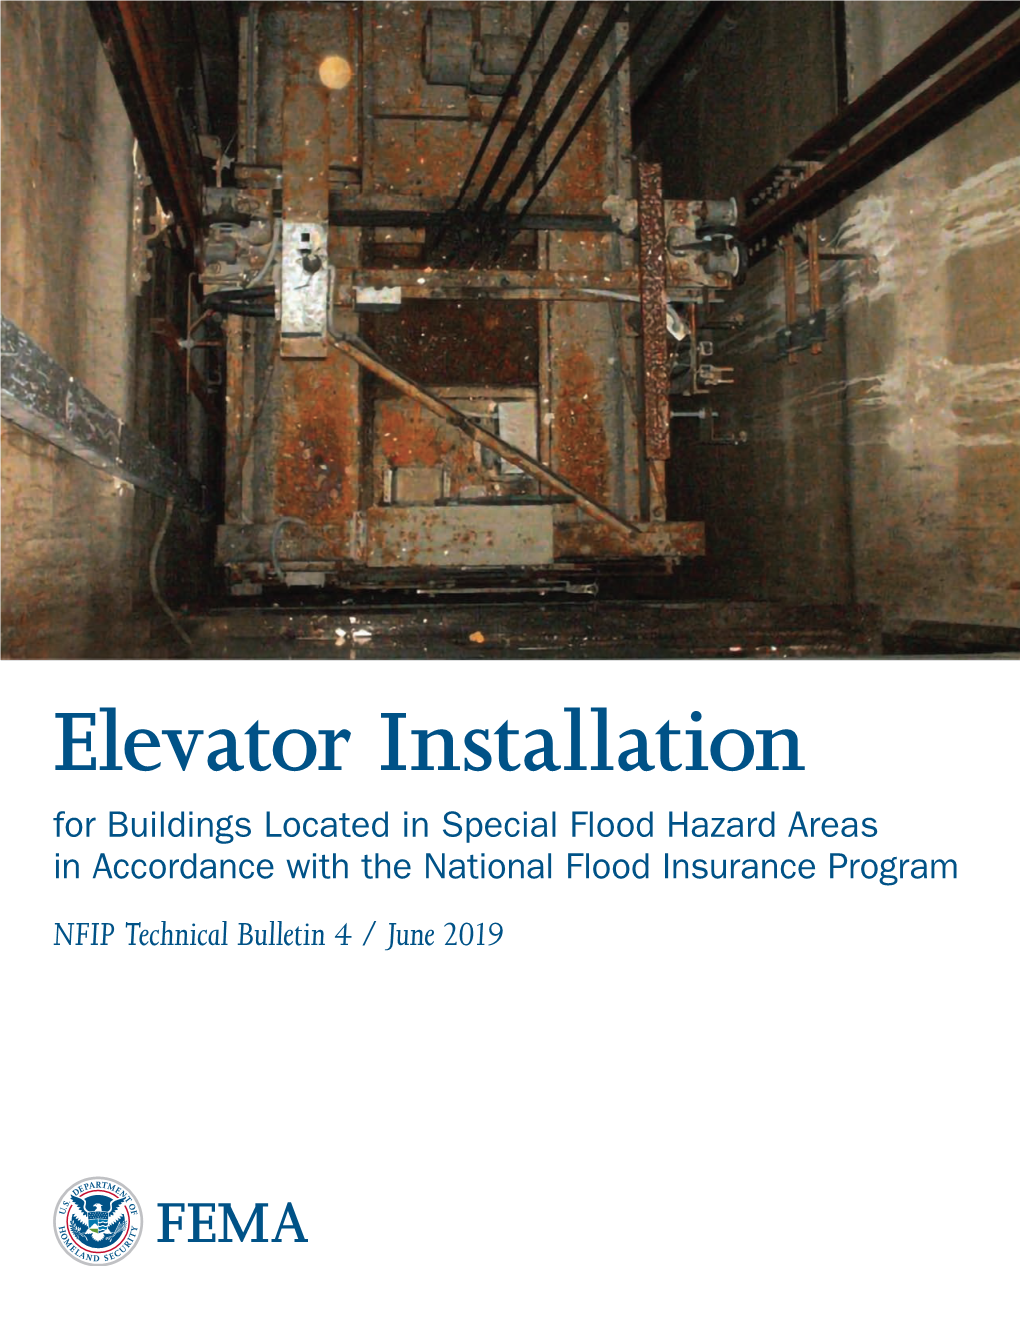 Elevator Installation for Buildings Located in Special Flood Hazard